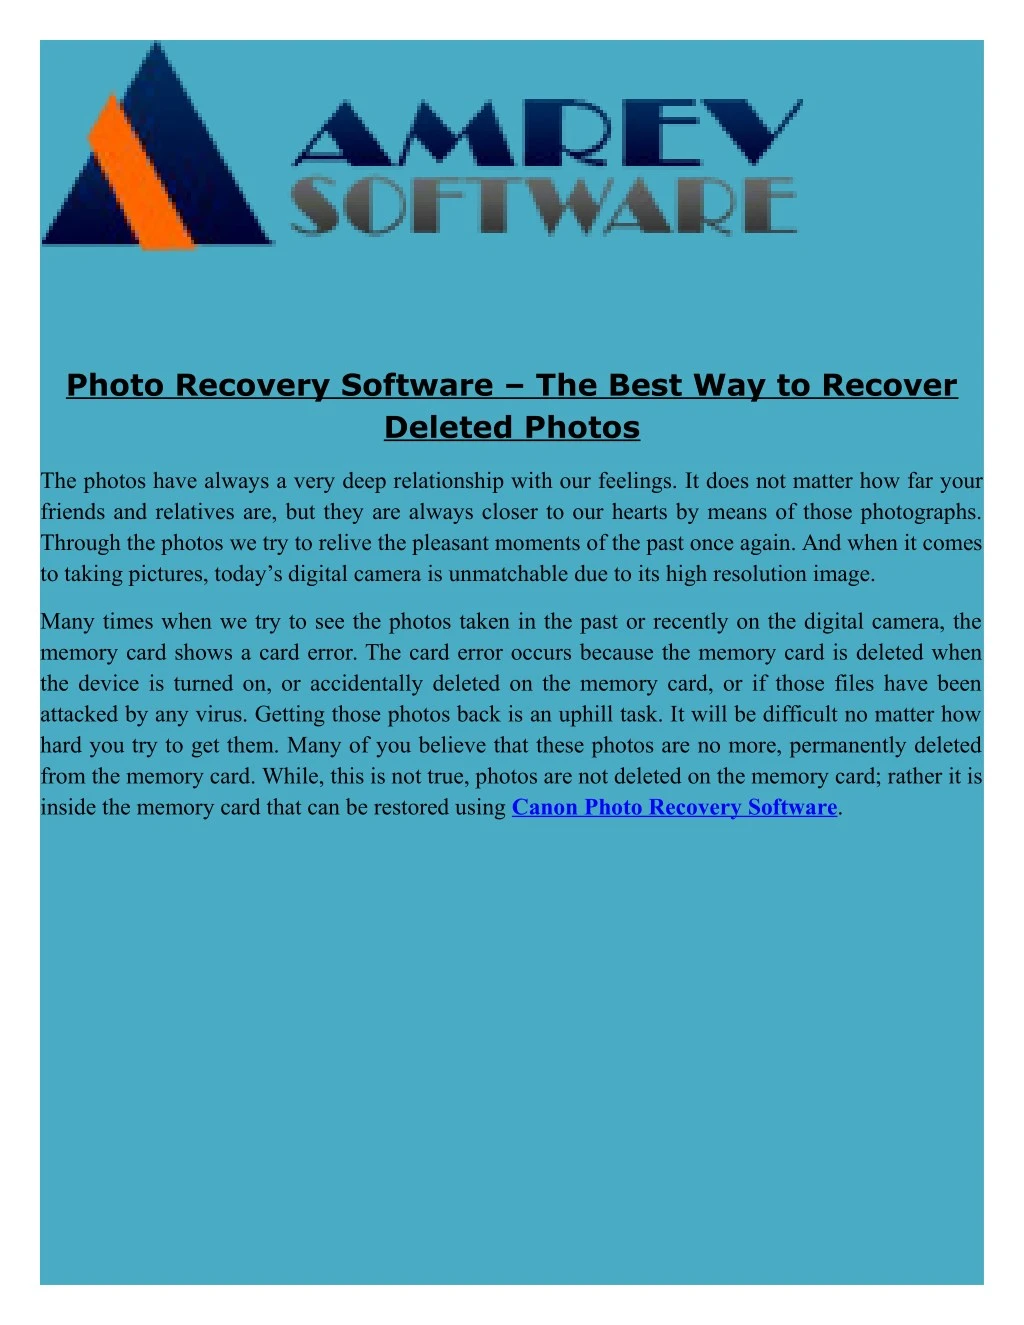 photo recovery software the best way to recover